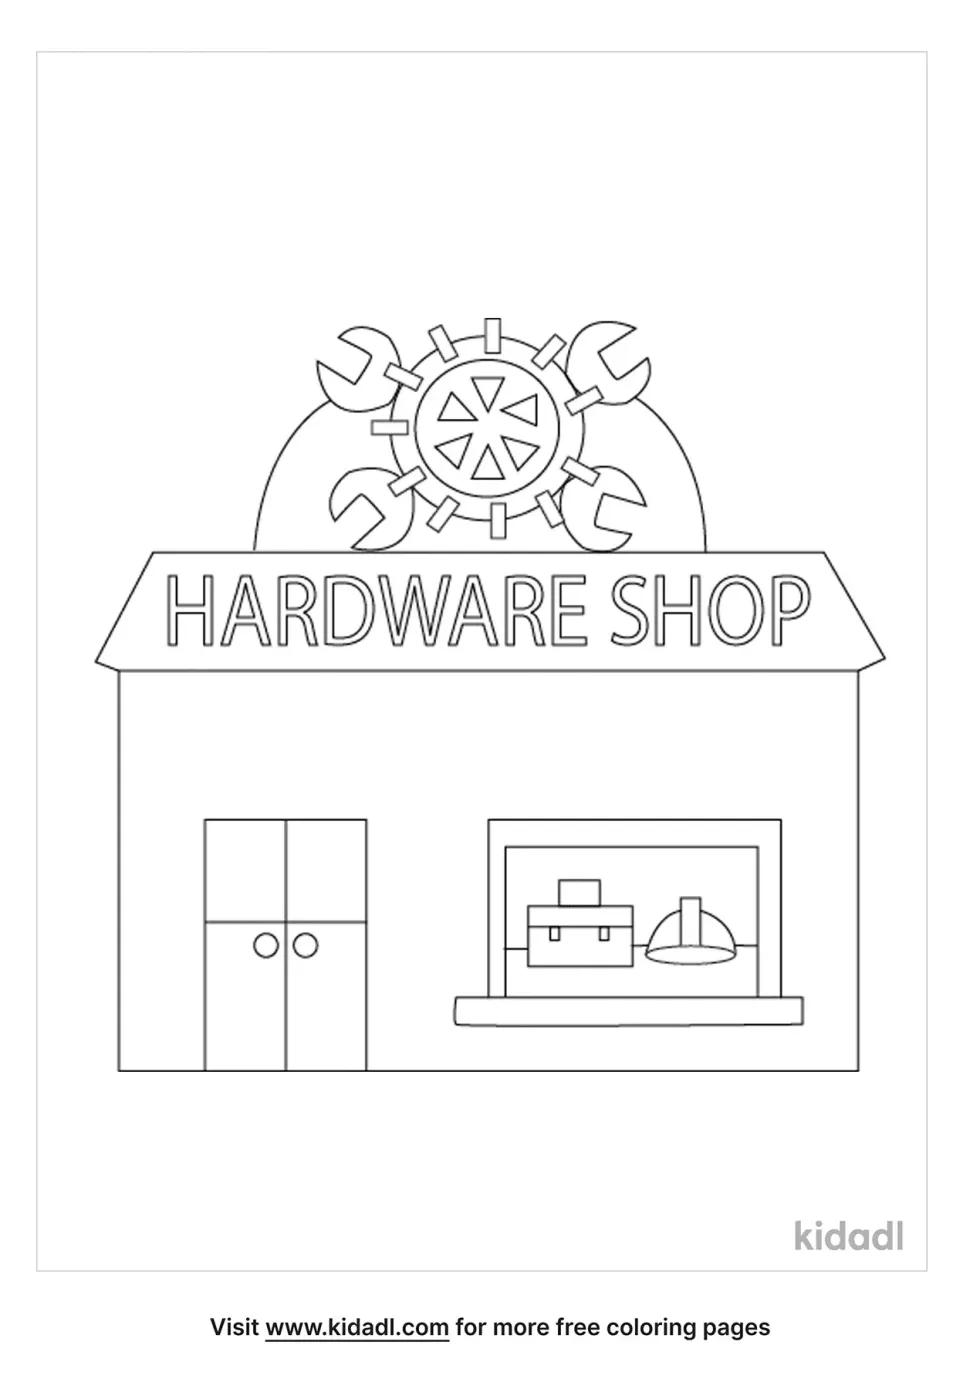 Hardware Store Coloring Page